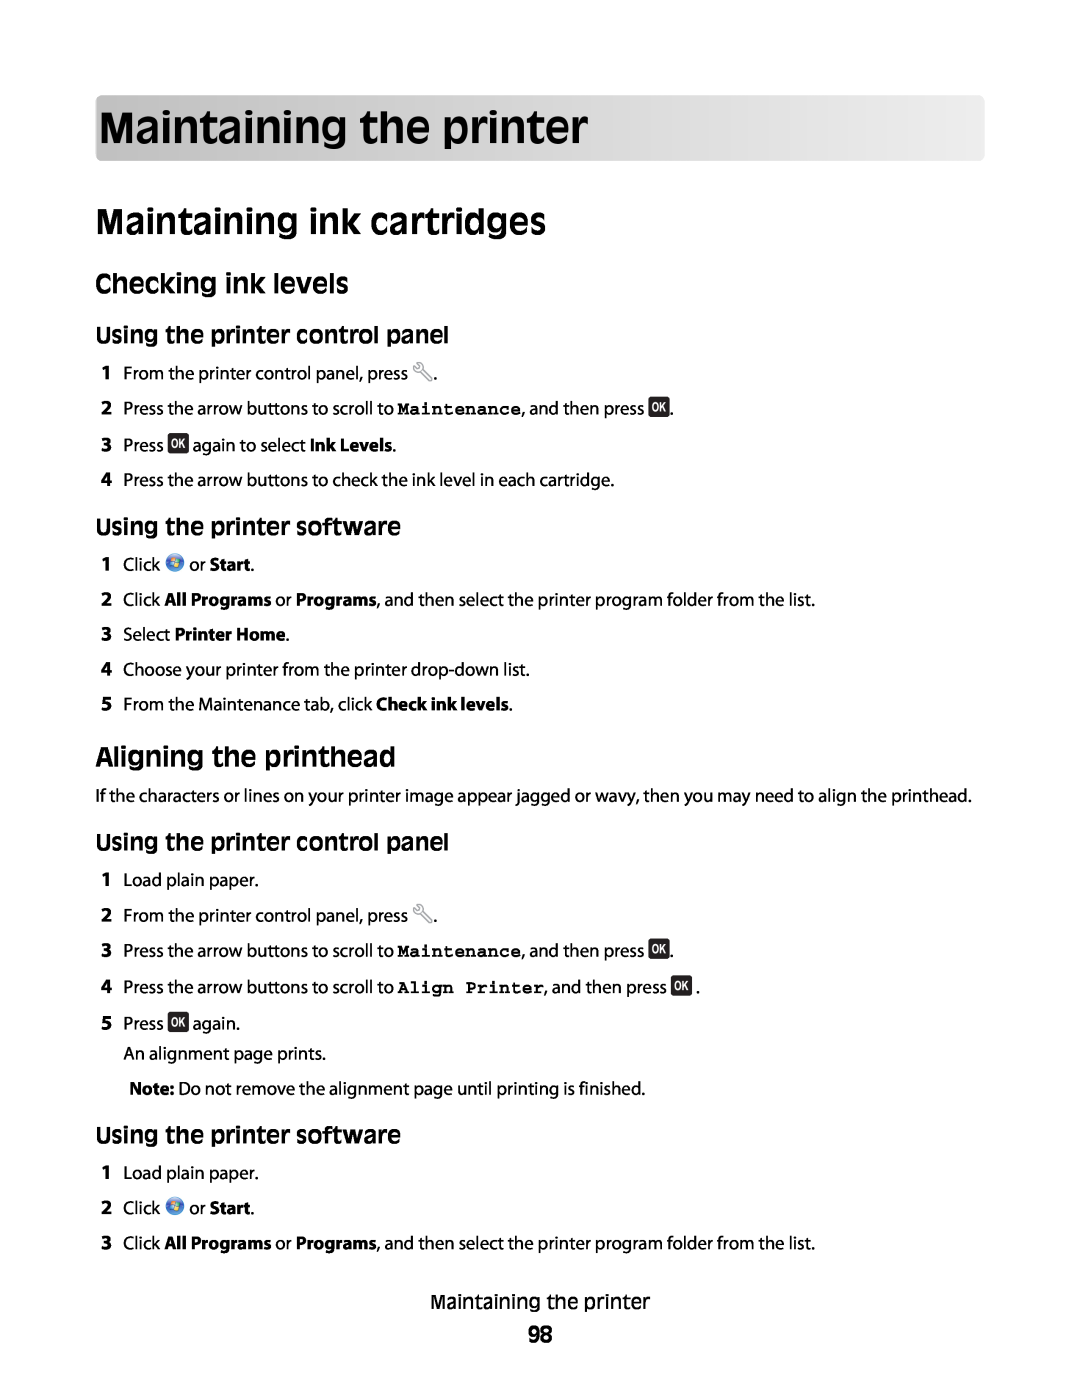 Dell V515W manual Maintaining the printer, Maintaining ink cartridges, Checking ink levels, Aligning the printhead 